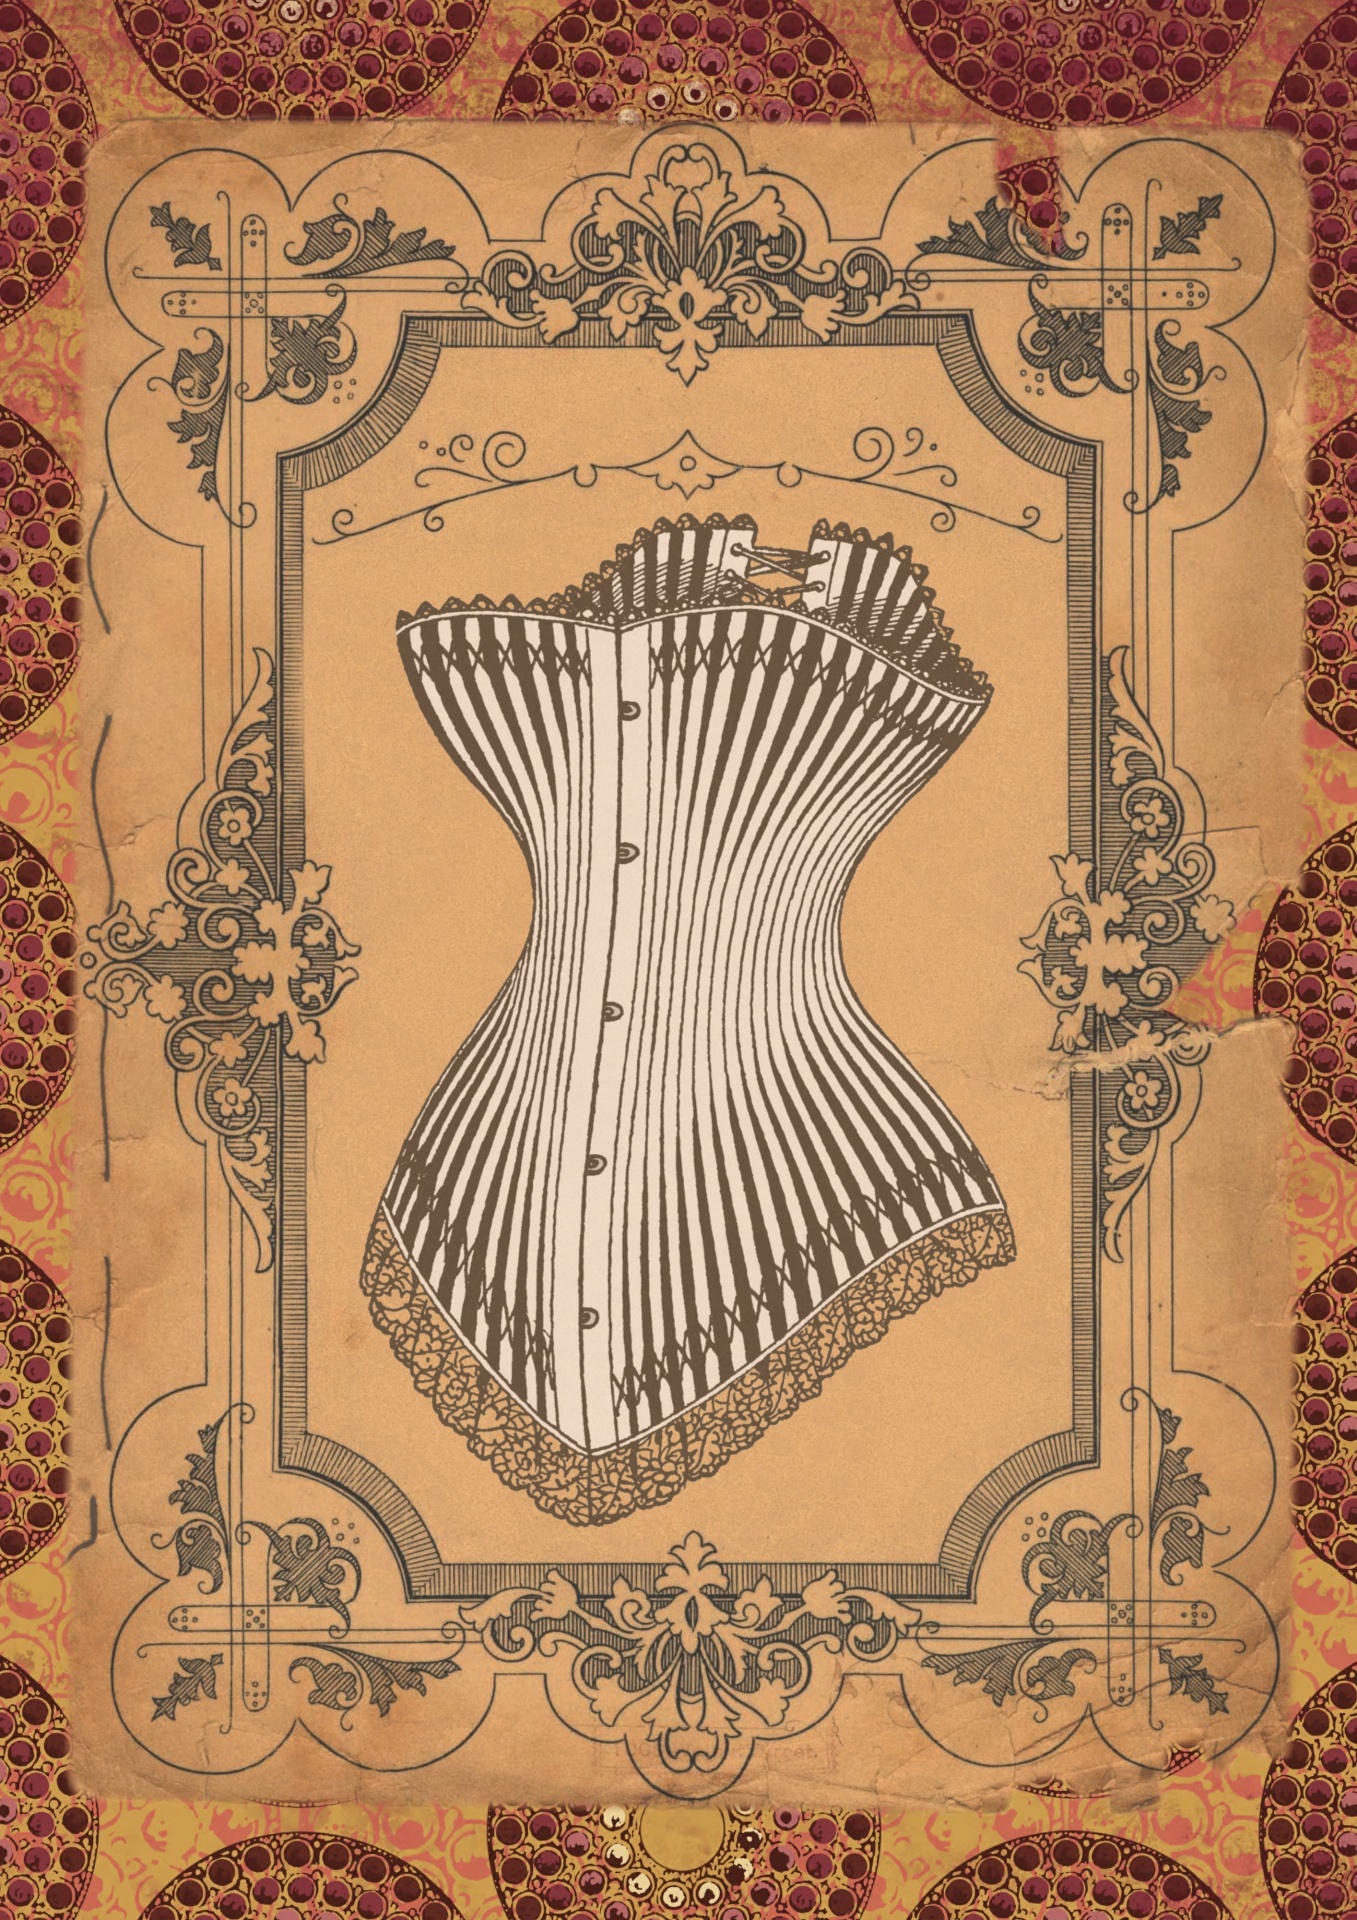 Conical Victorian Corset Student Work Registration is still on